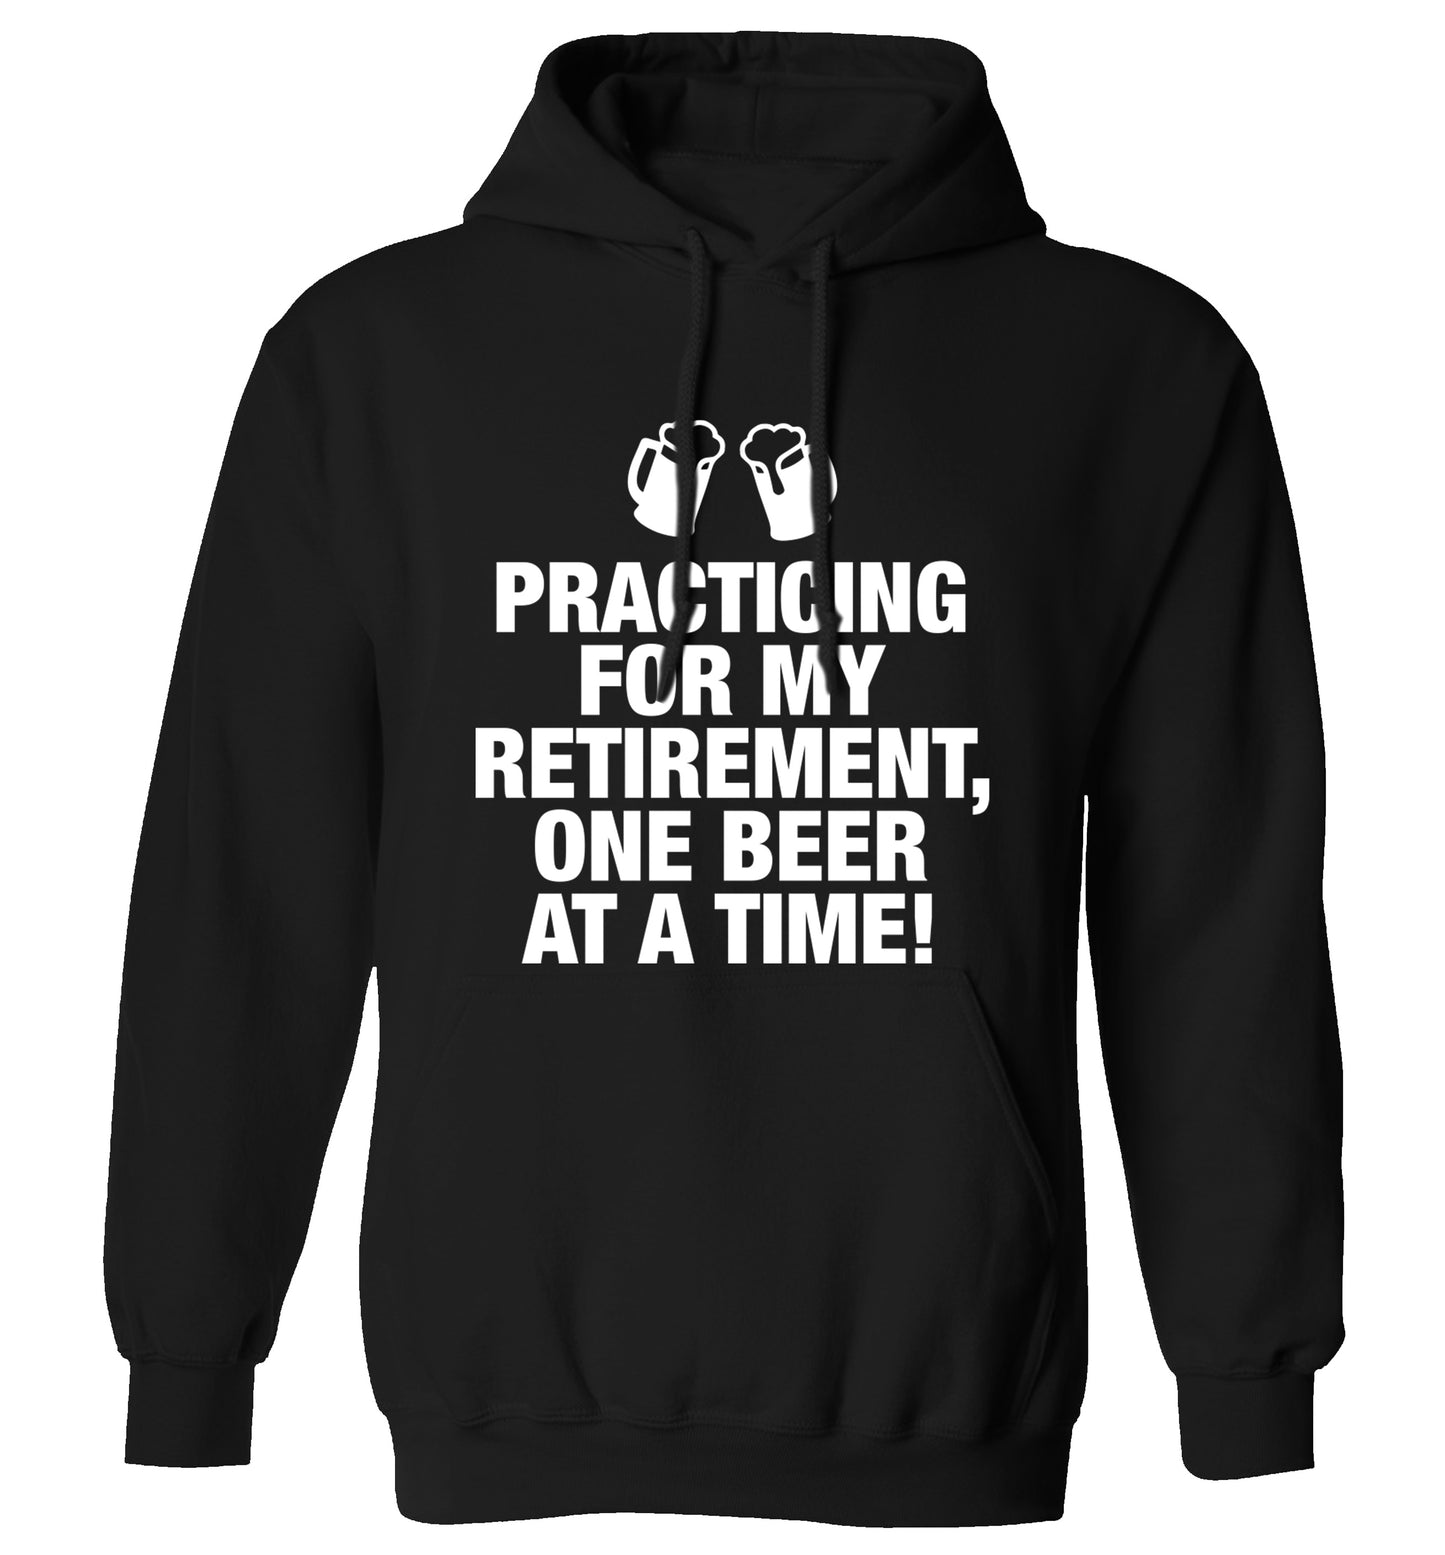 Practicing my retirement one beer at a time adults unisex black hoodie 2XL